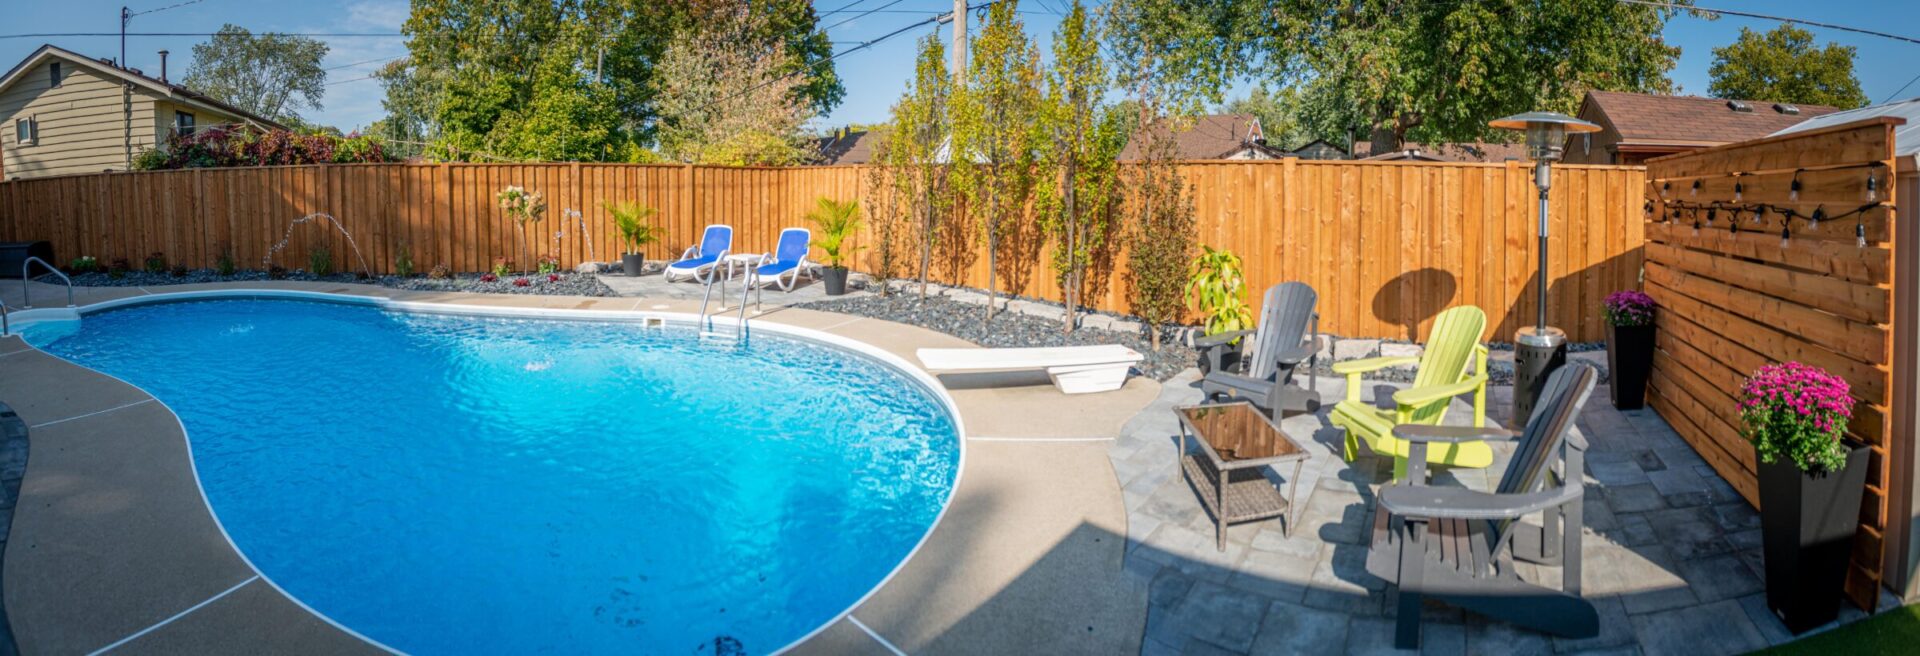 A panoramic view of a backyard with a curvy swimming pool, sun loungers, patio furniture, plants, a wooden fence, and string lights.